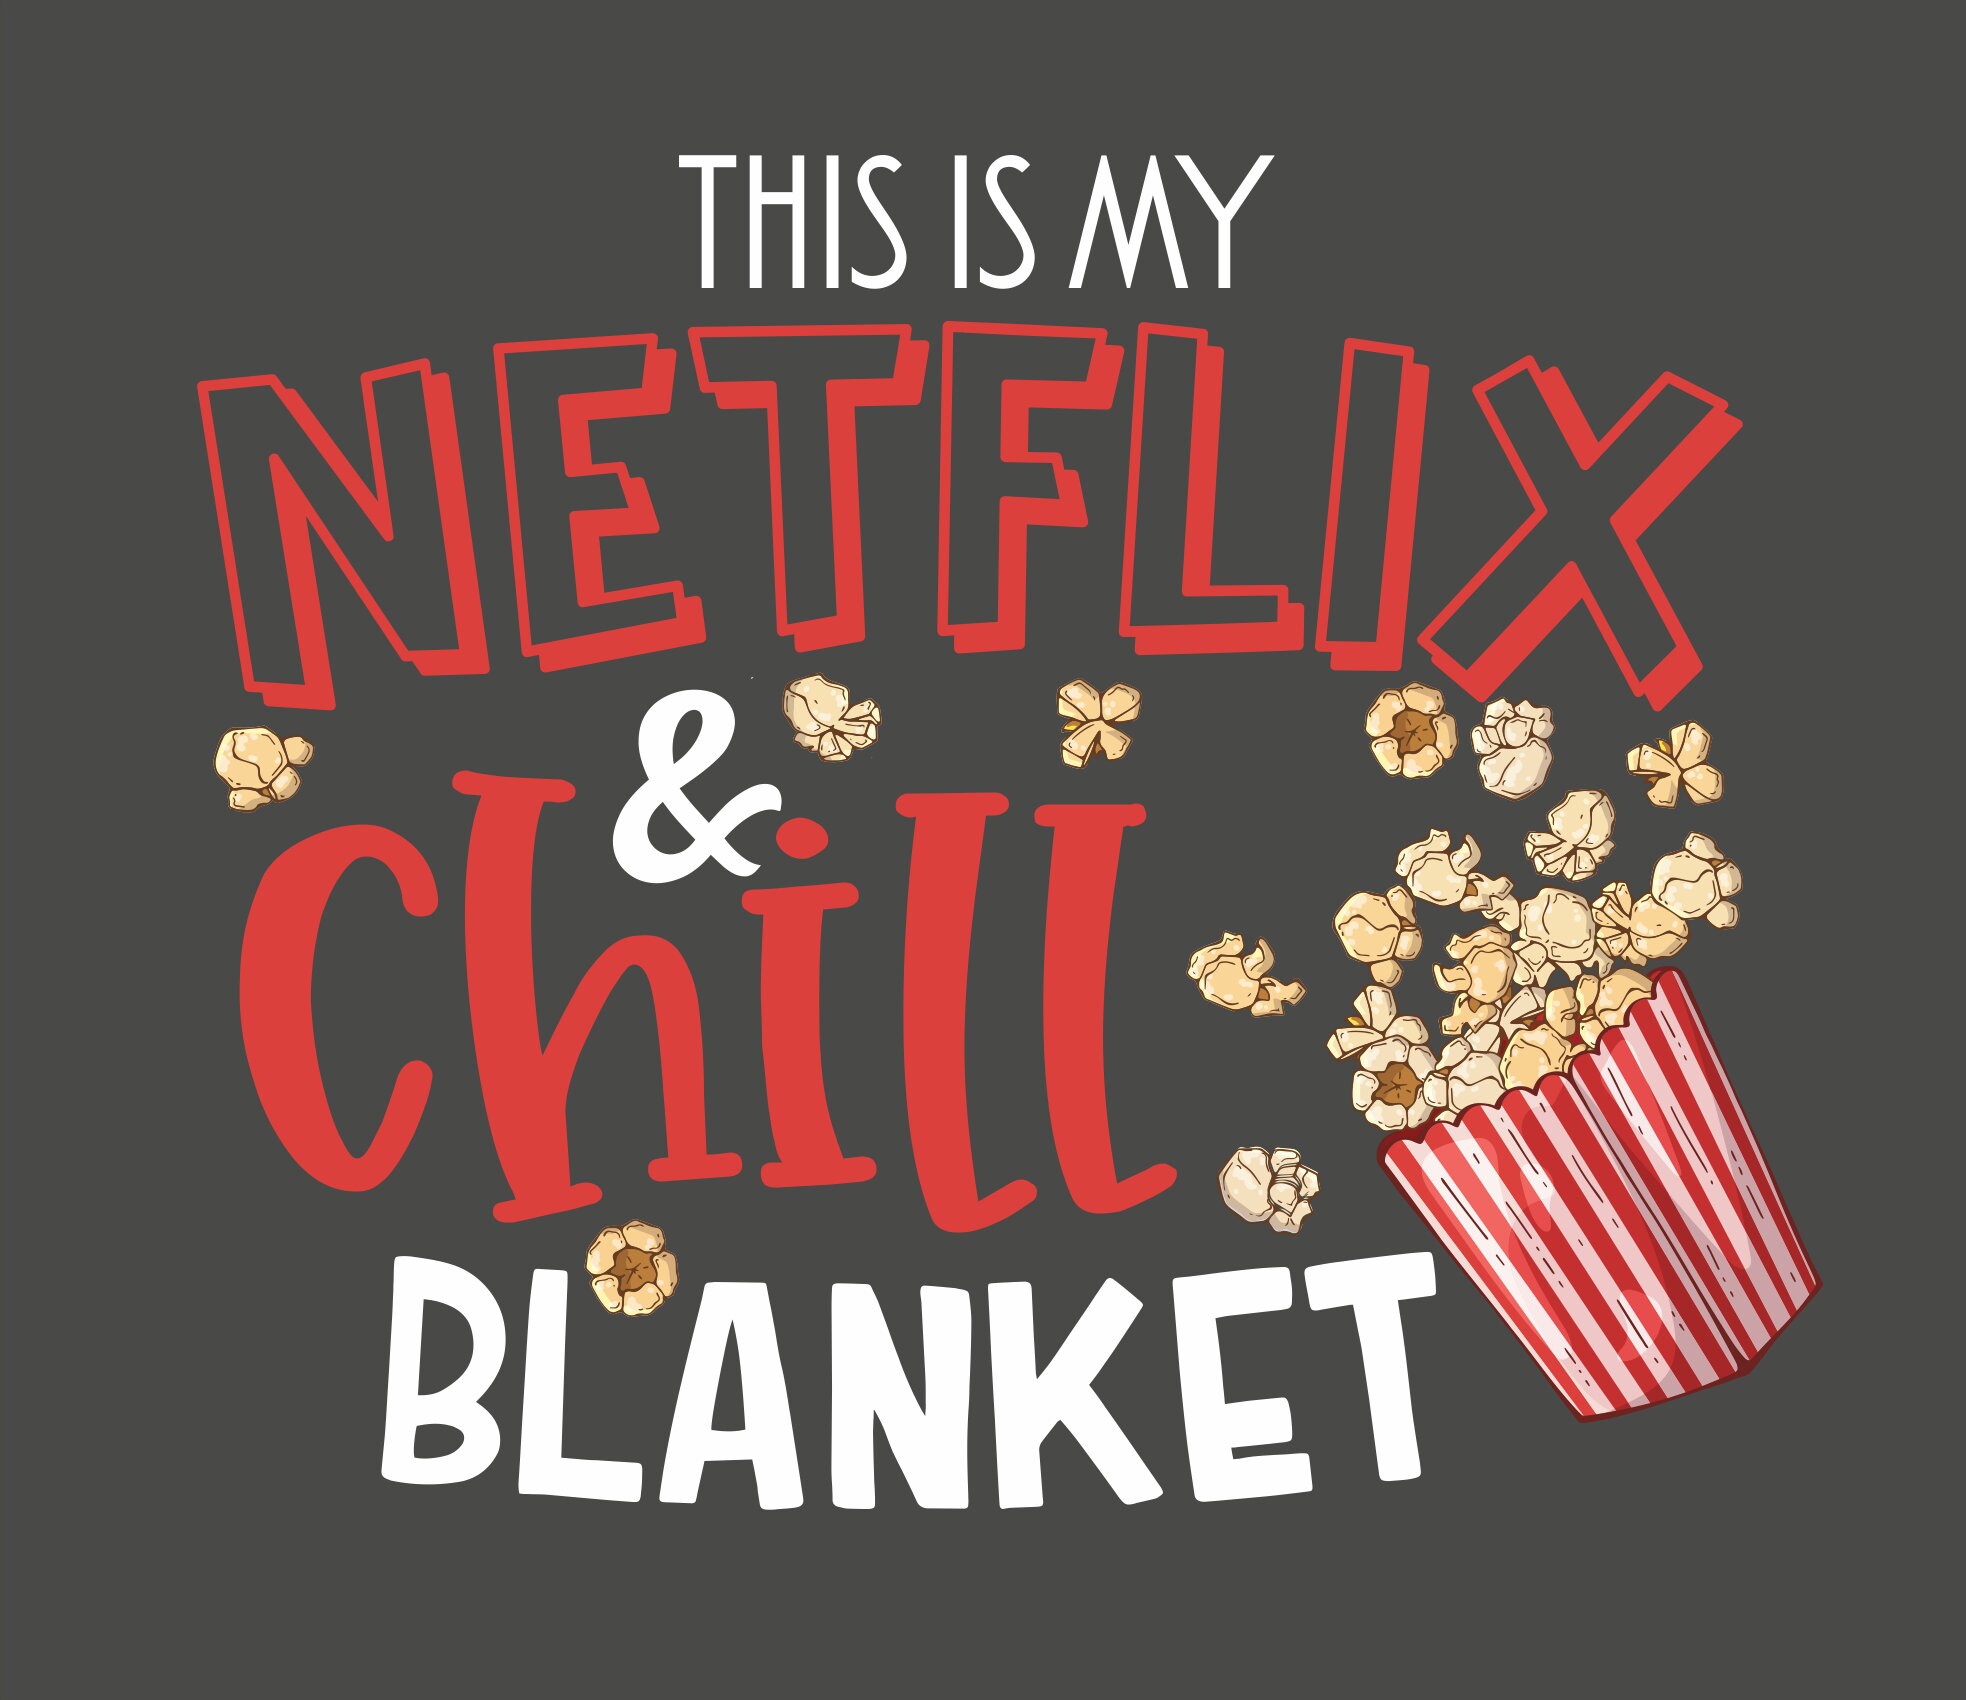 5 Throw Blankets to Wrap Around Your Body as You Netflix and Chill